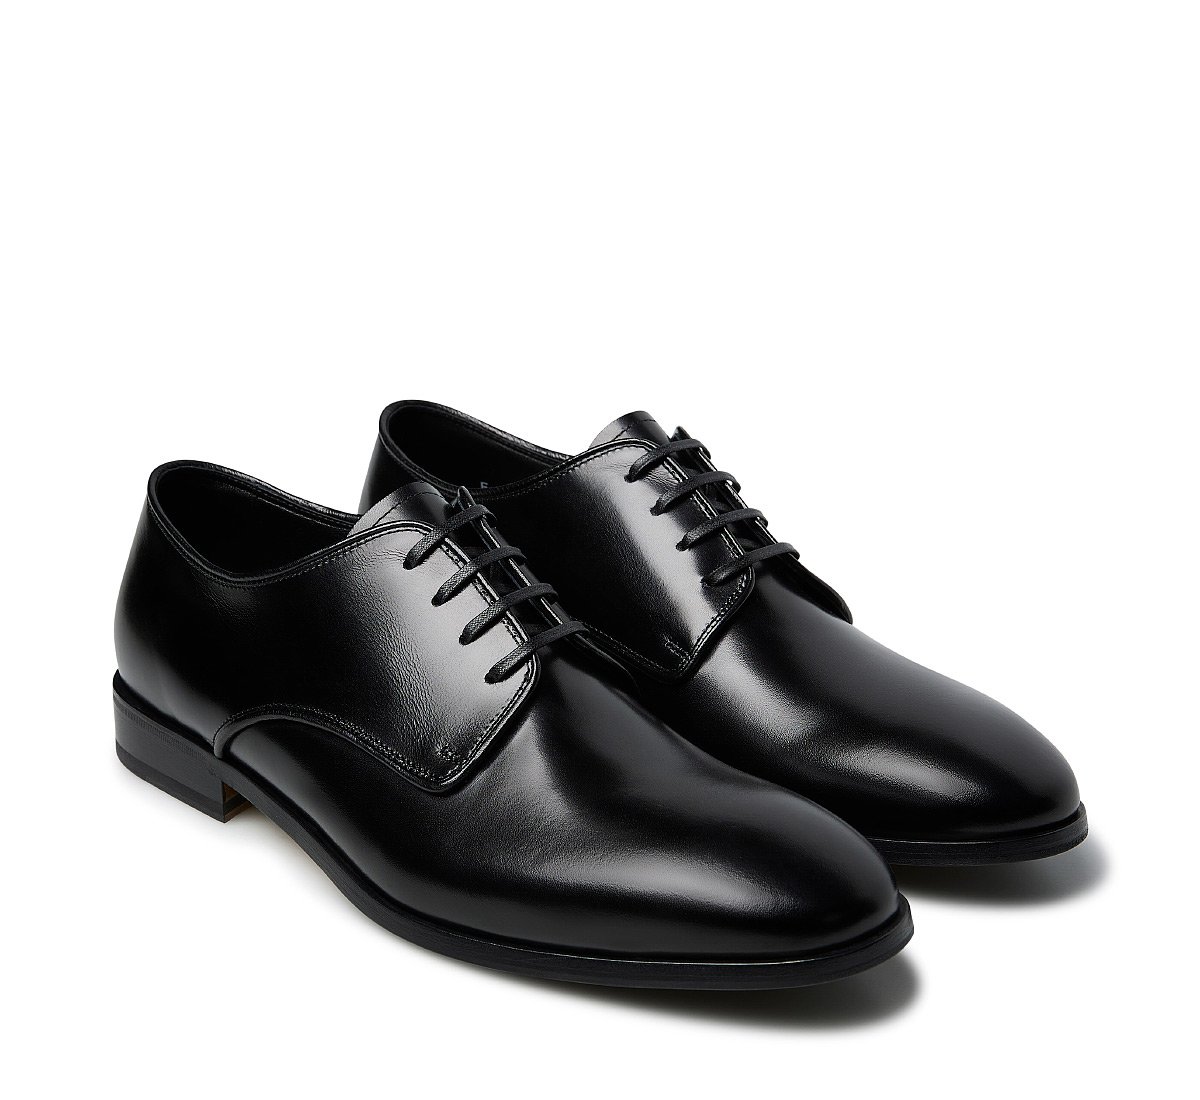 Calf leather lace-up